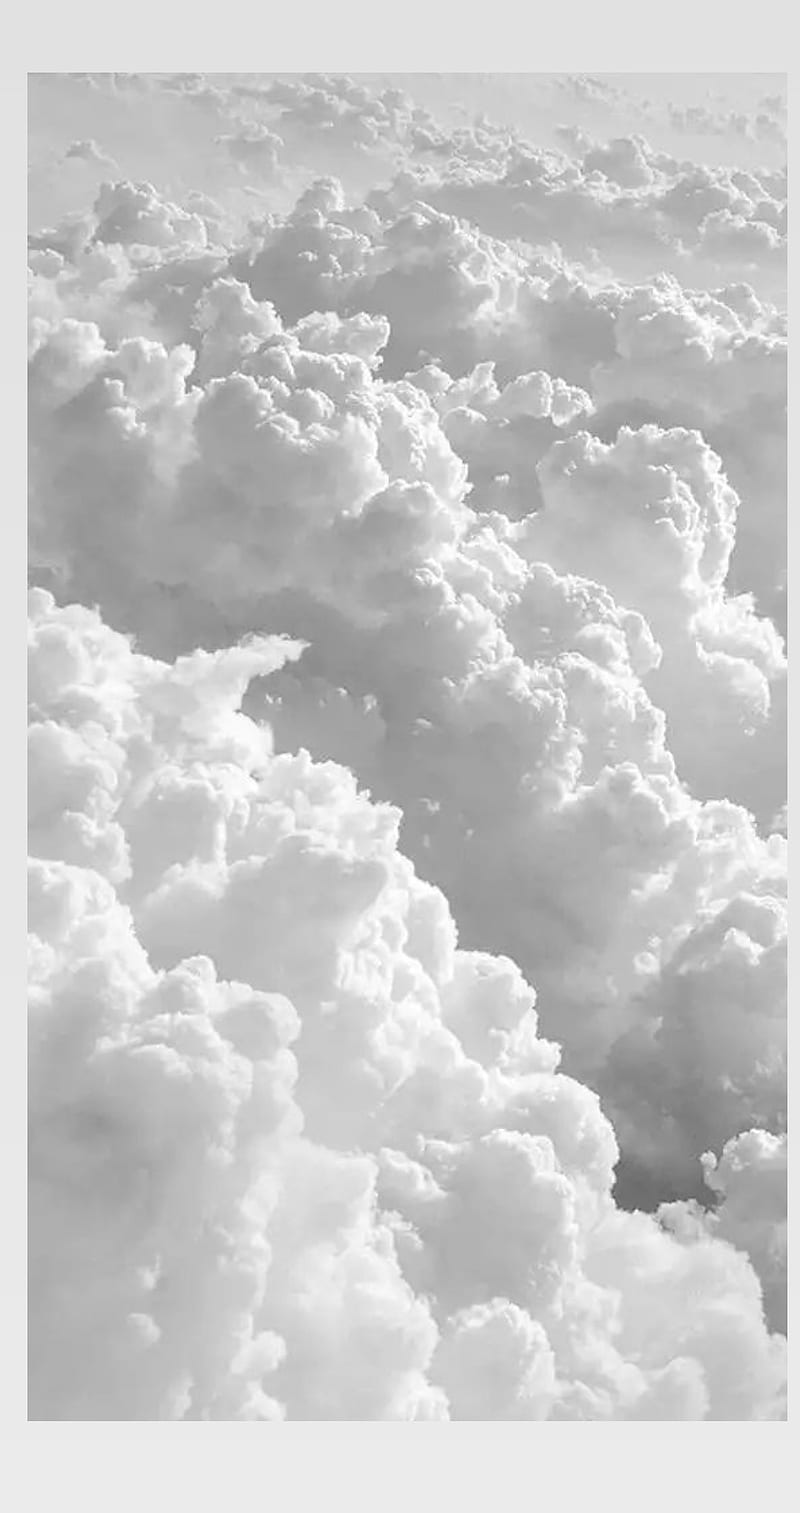 Clouds on Sky in Black and White  Free Stock Photo